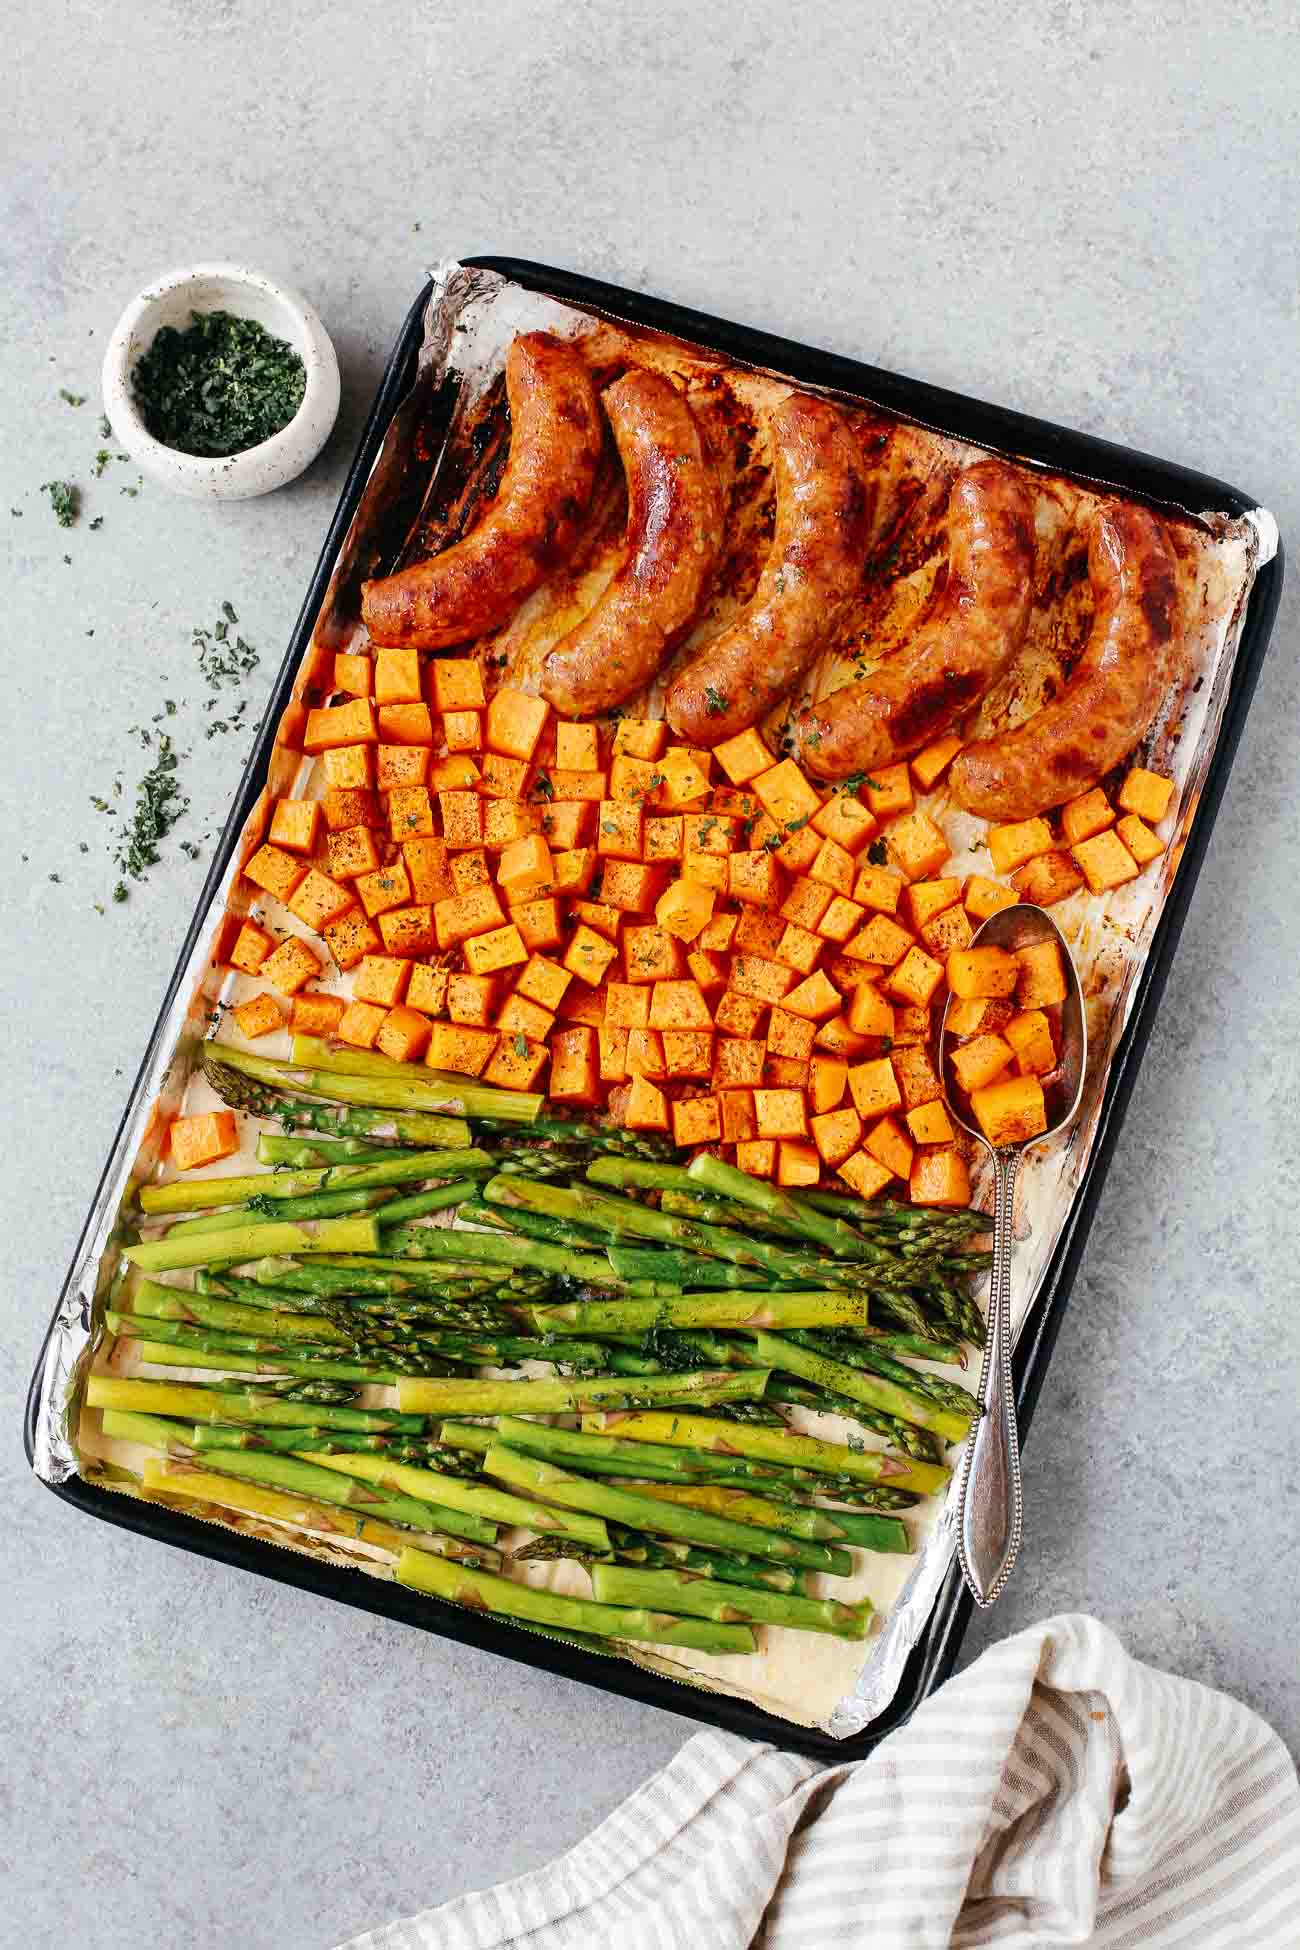 Overhead view of a sheet pan containing cooked sausage, sweet potatoes, and asparagus.